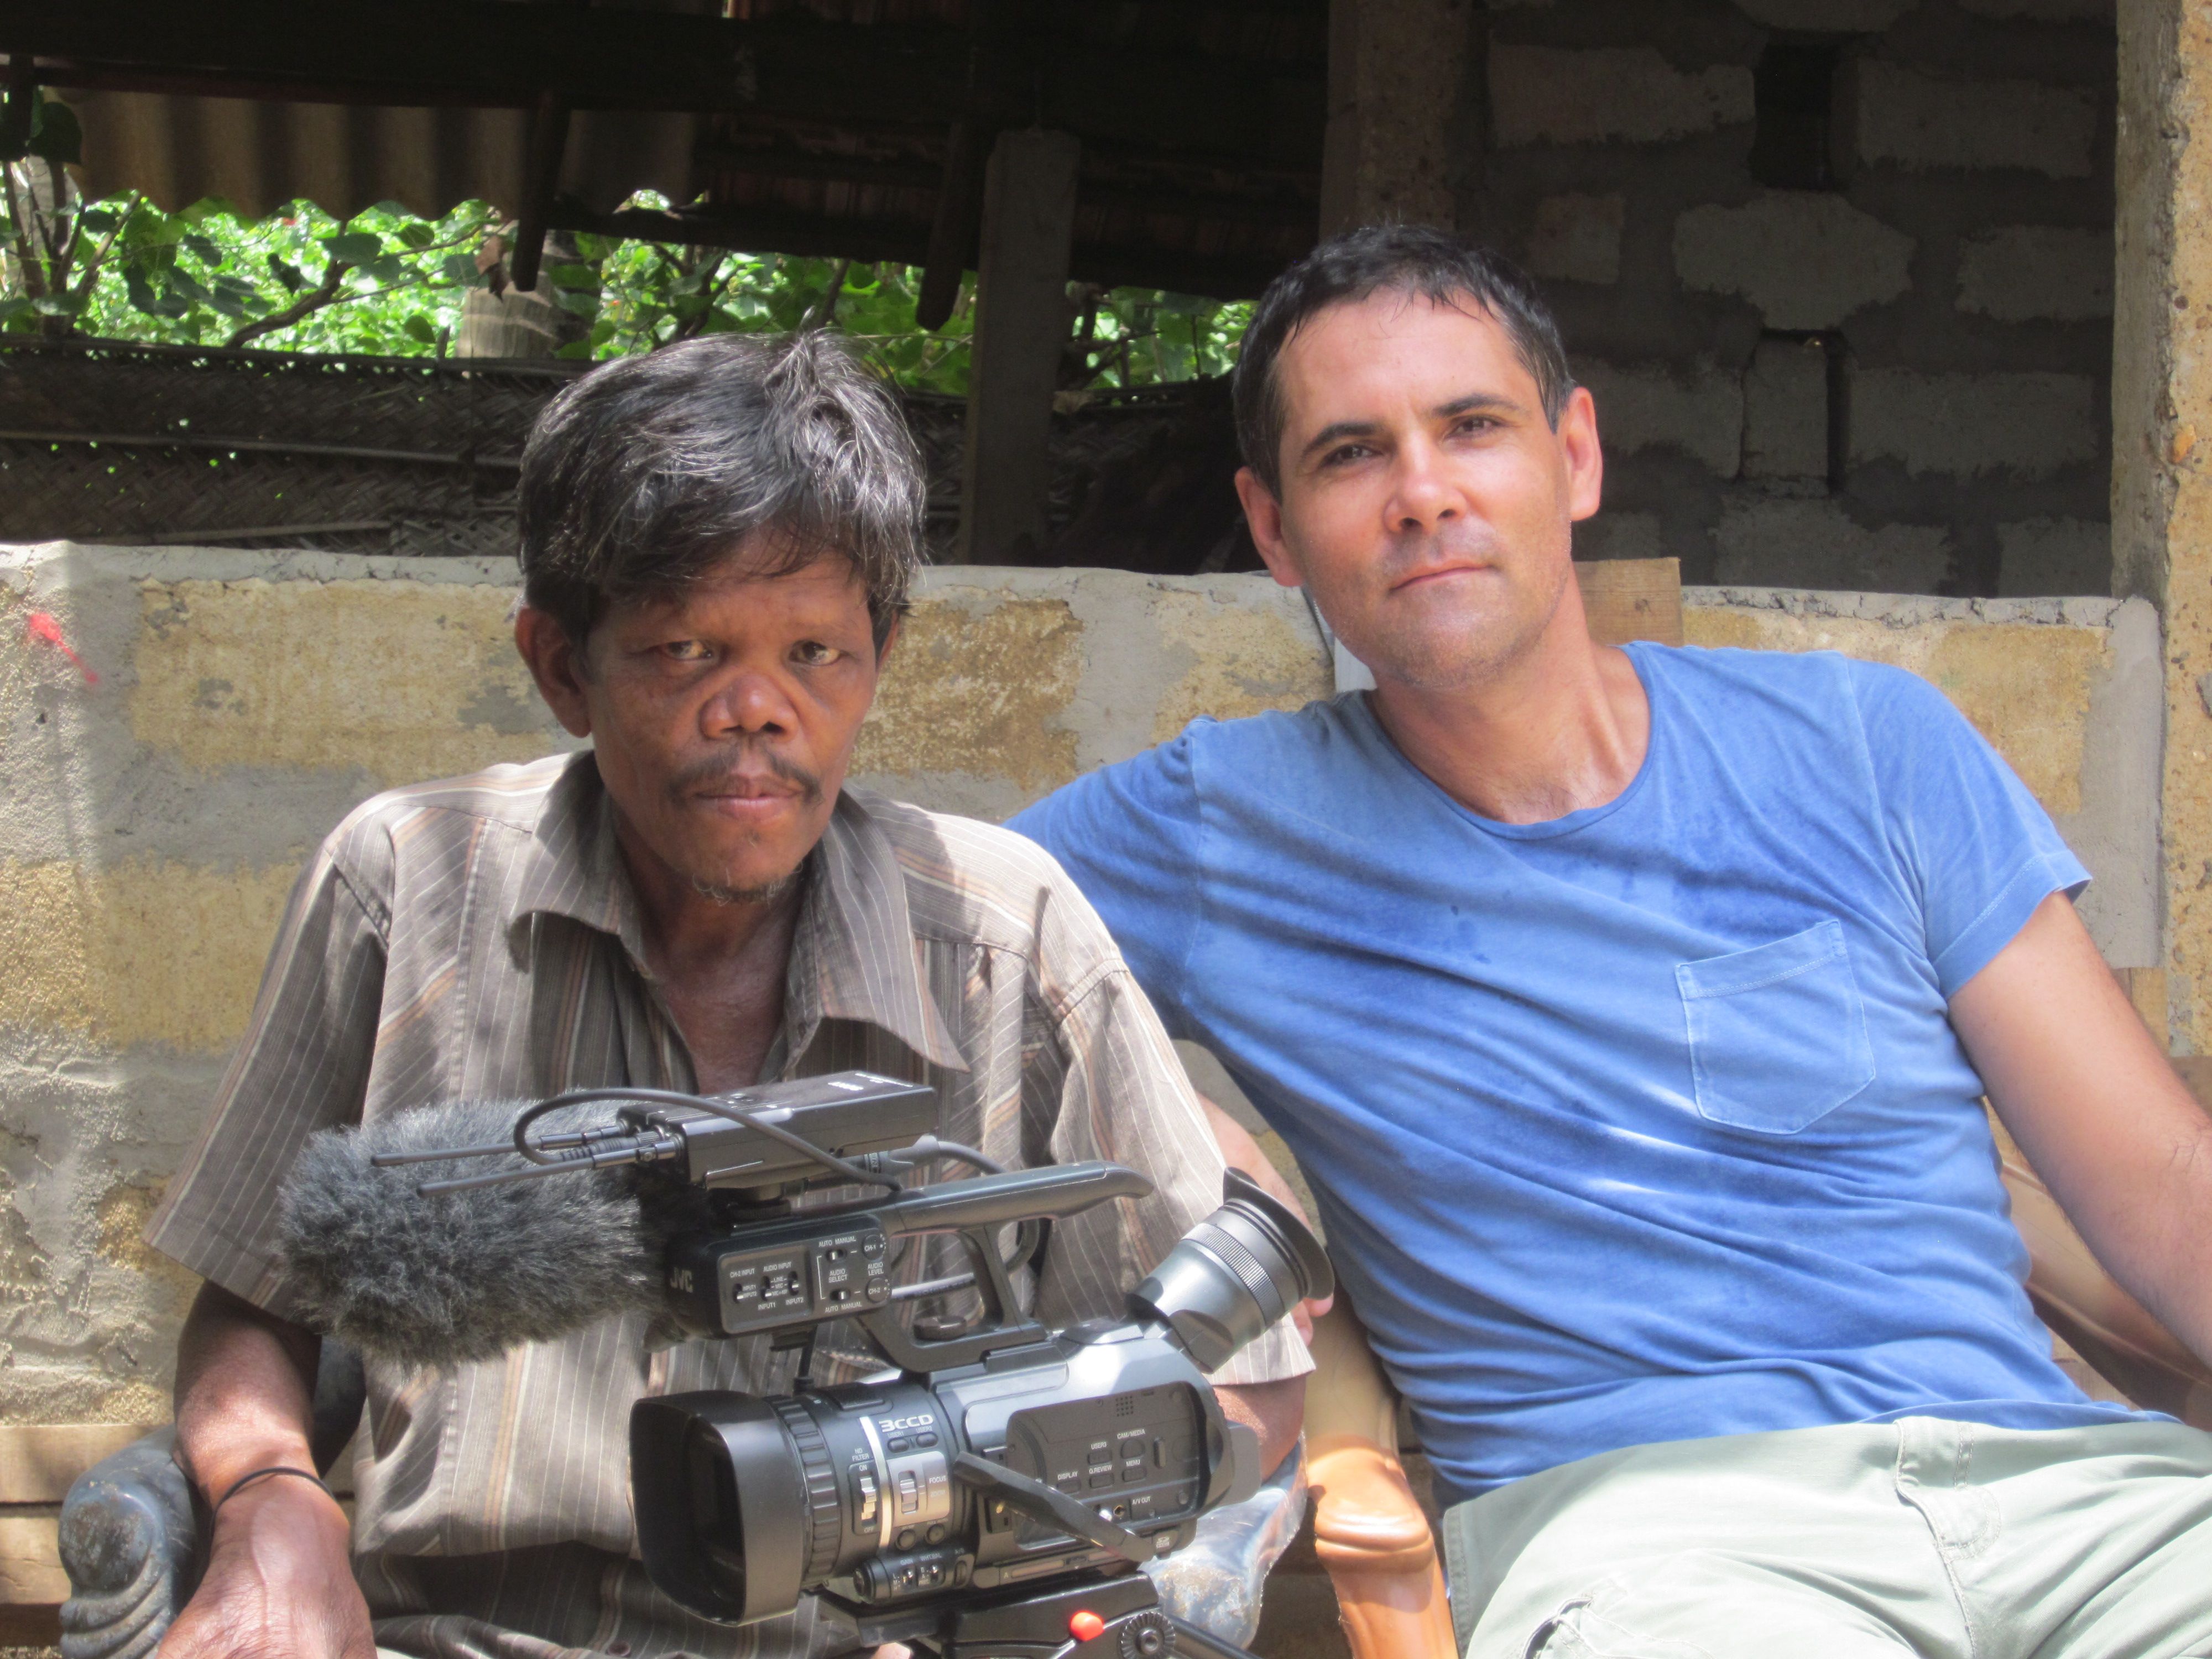 Ross Velton pictured with a person affected by leprosy in Jaffna, Sri Lanka.